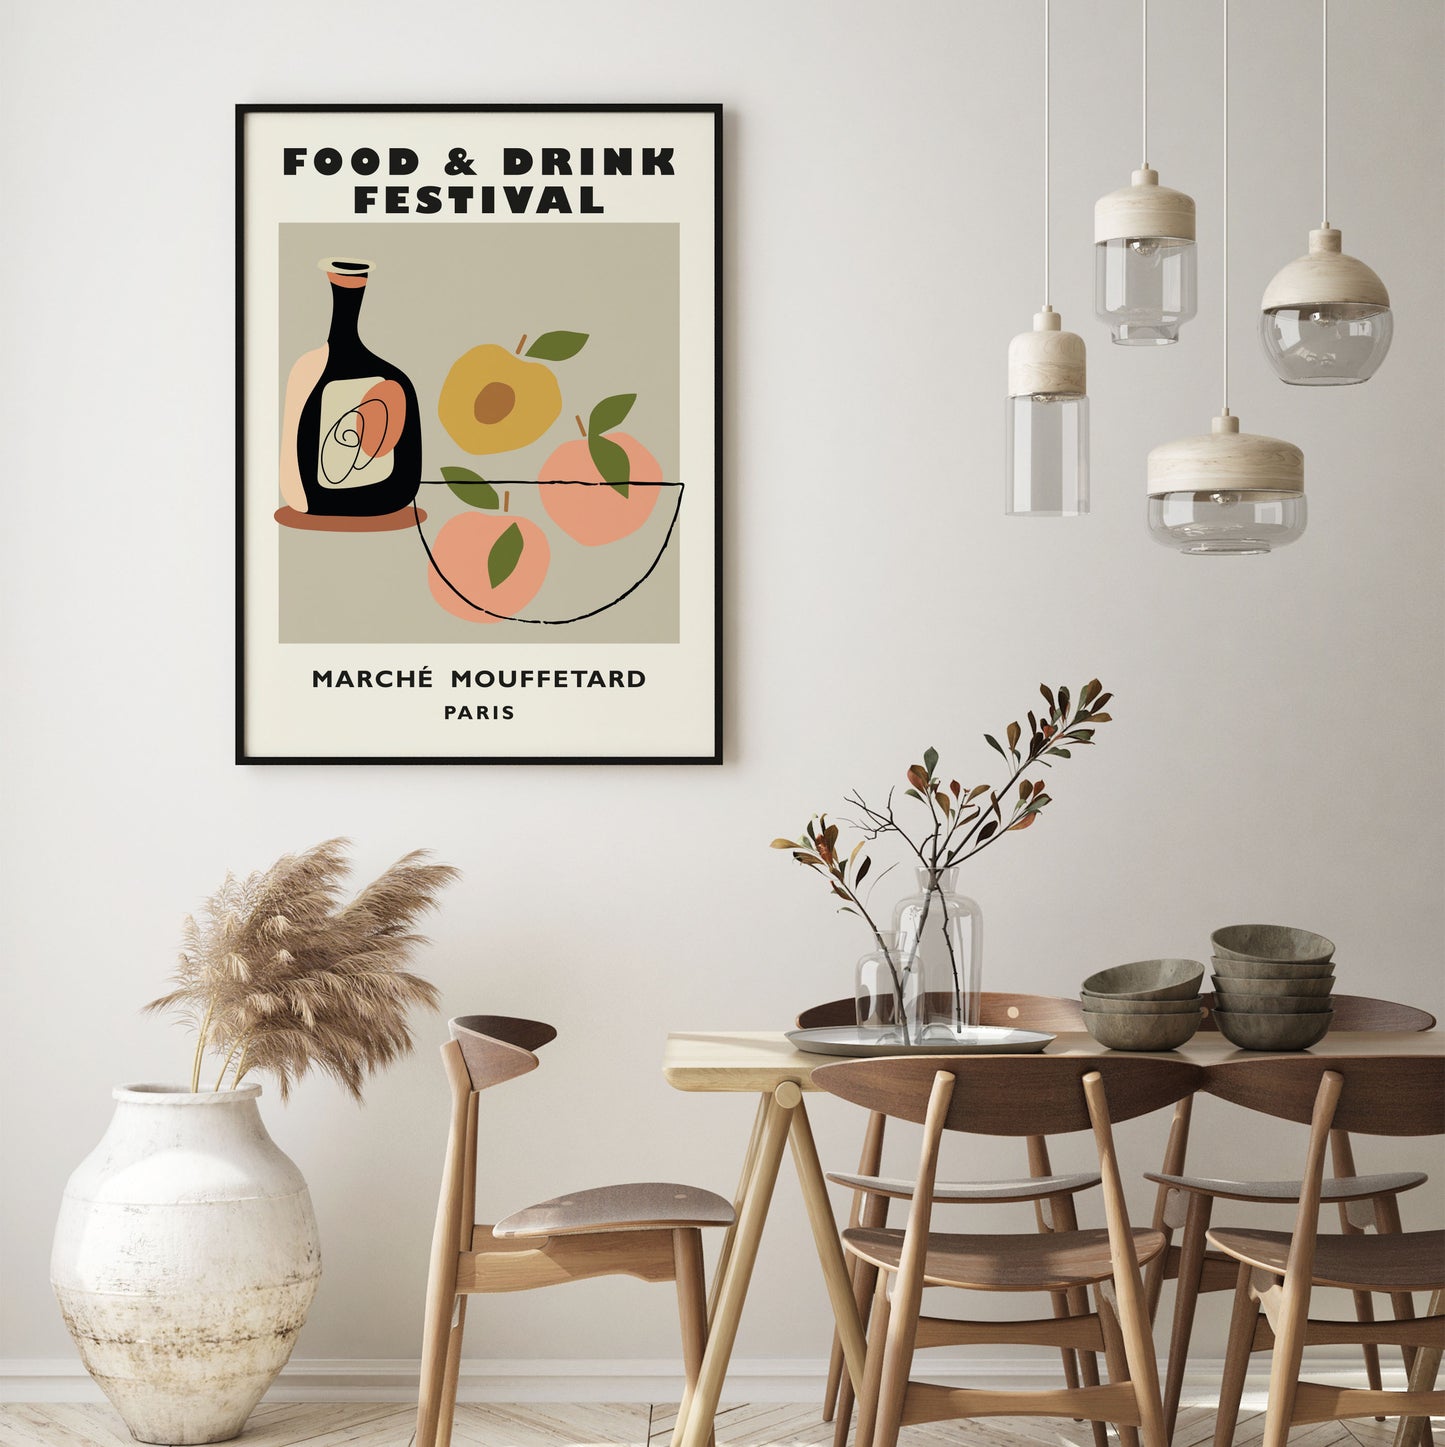 Food and drink festival Paris advertising poster for the kitchen or dining room